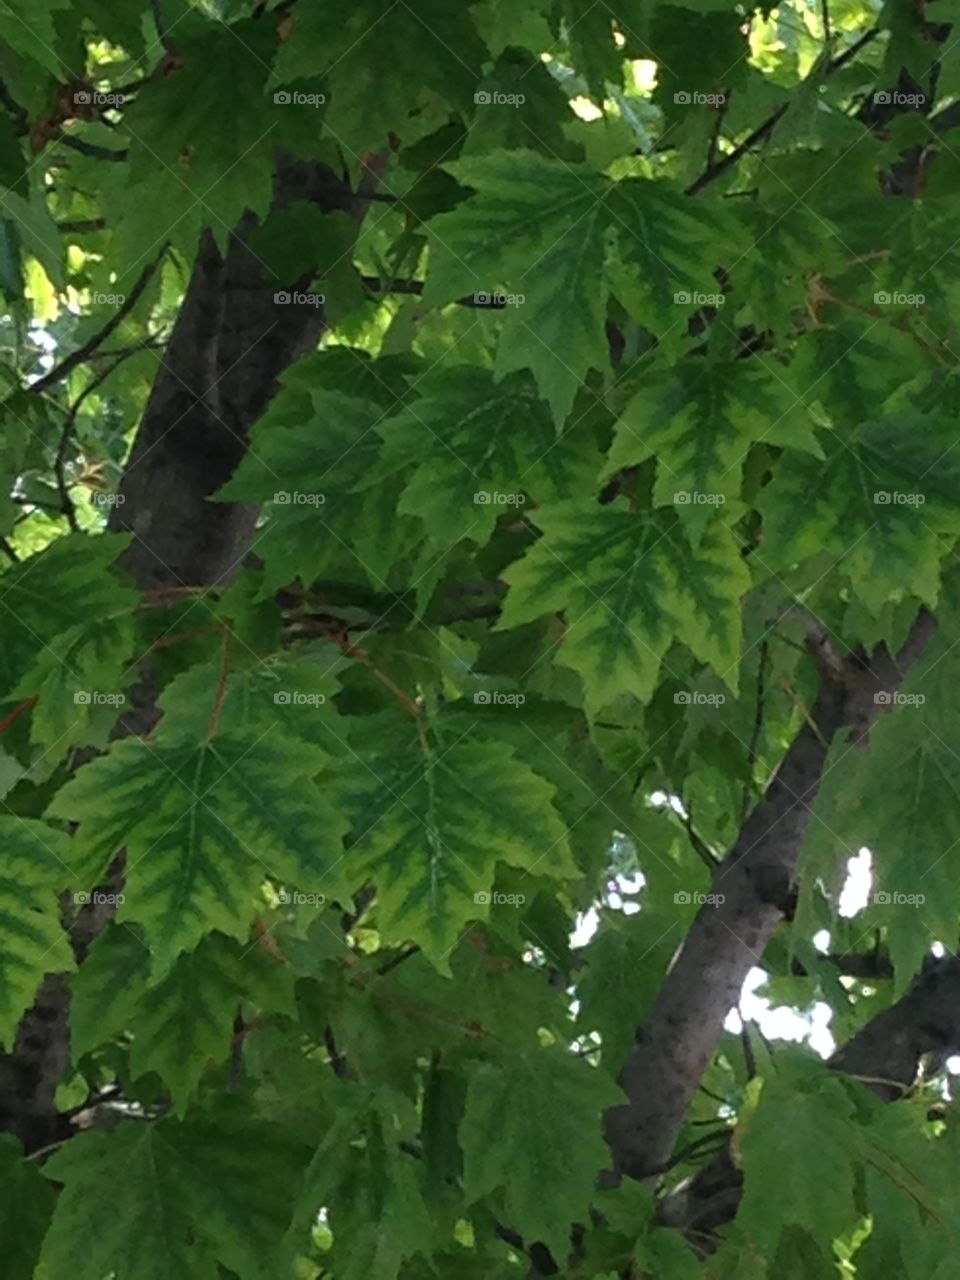 Tree leaves have two tones of green.